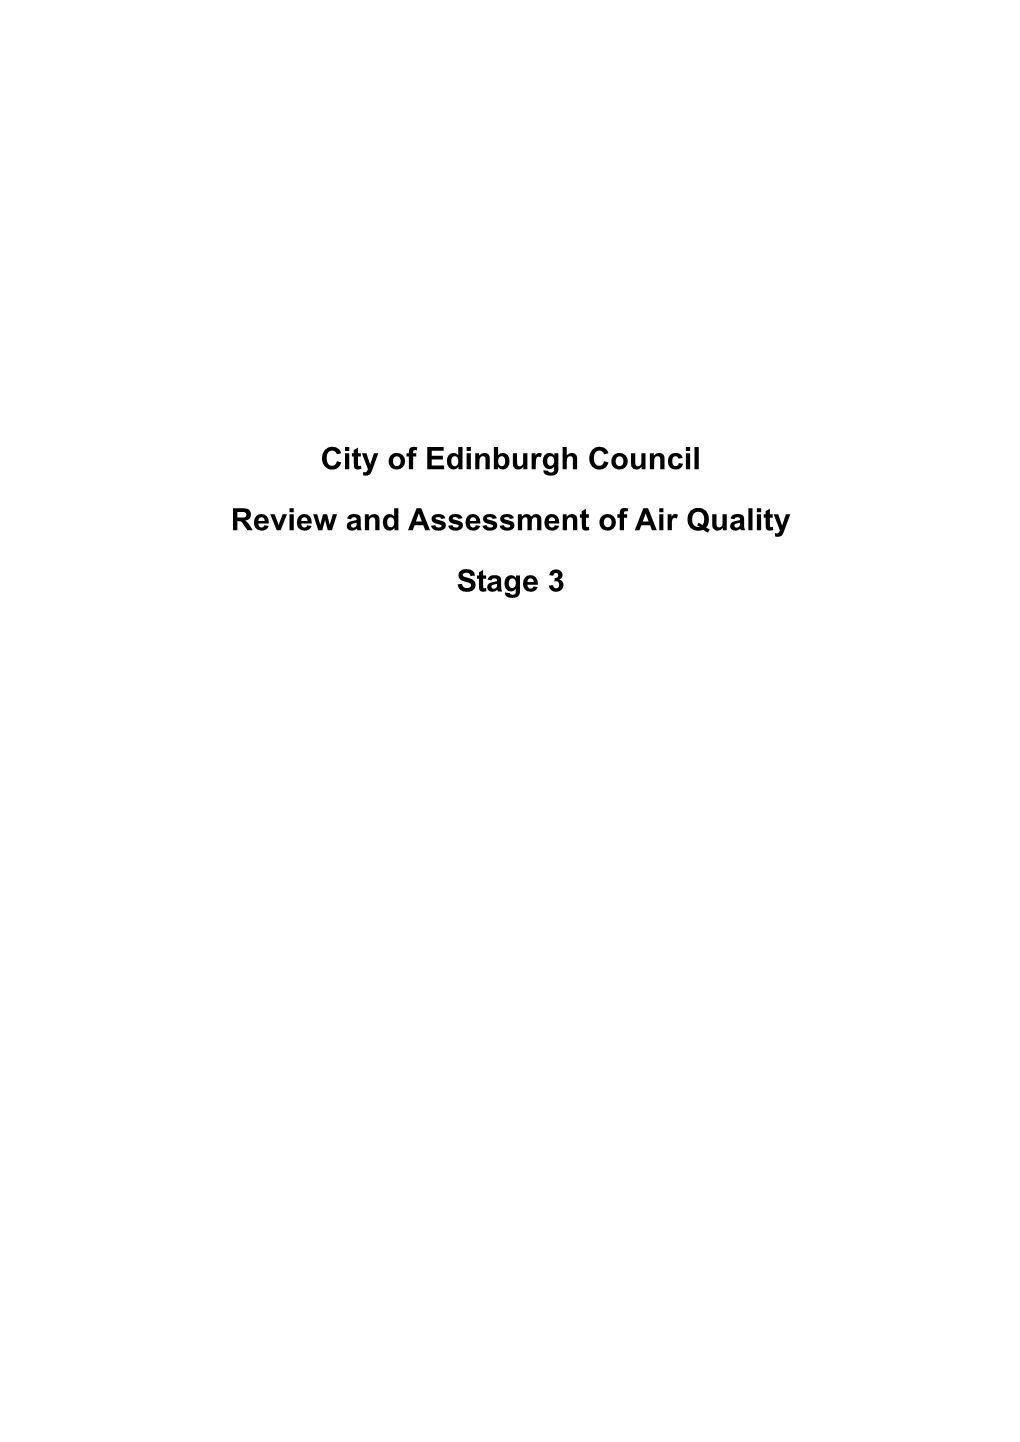 Round 1 Review and Assessment of Air Quality Stage 3